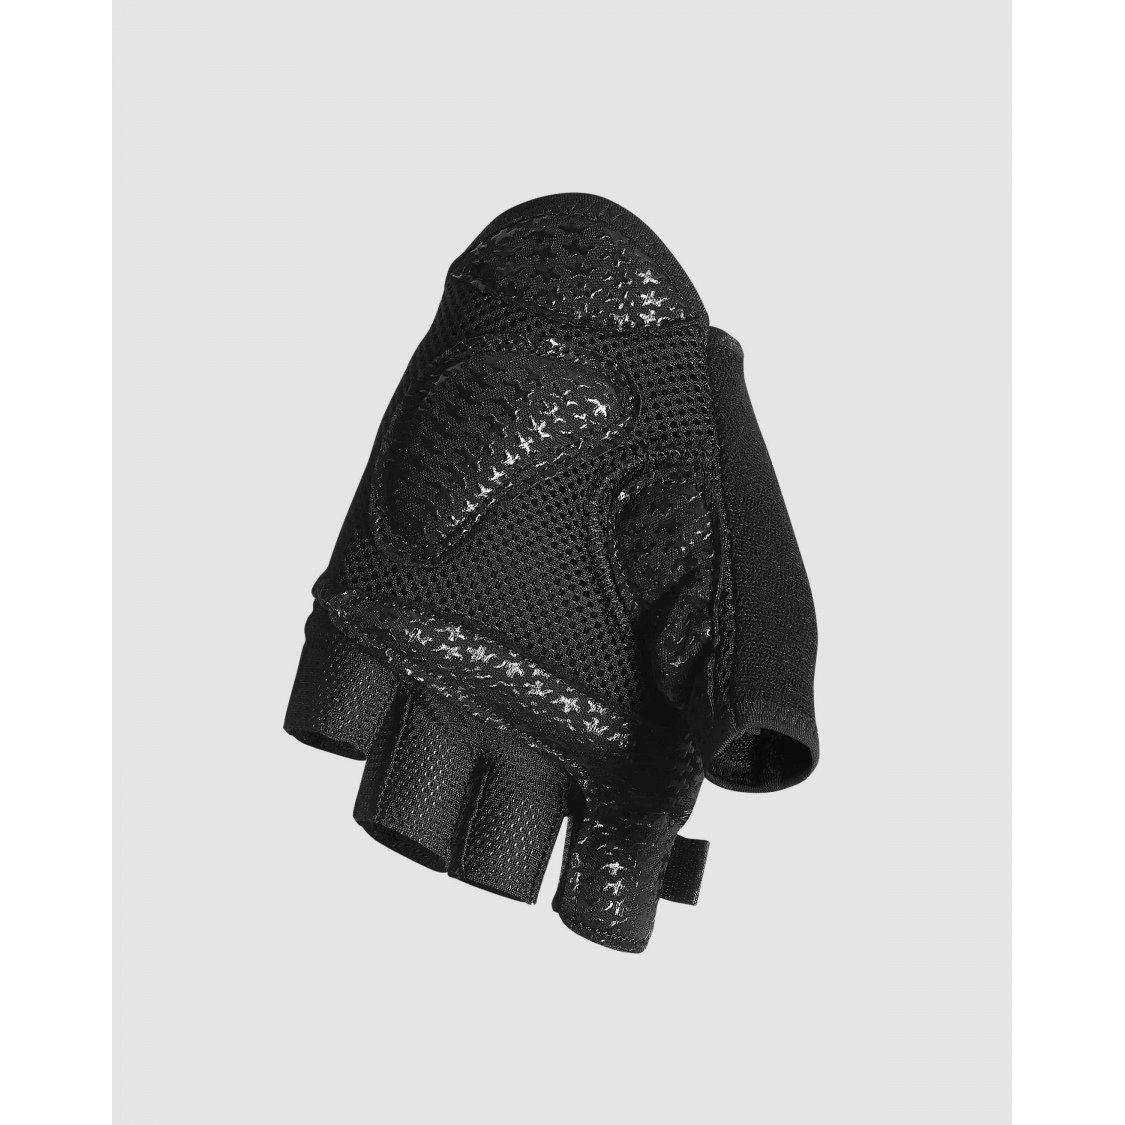 Assos of Switzerland Summergloves S7 | Strictly Bicycles